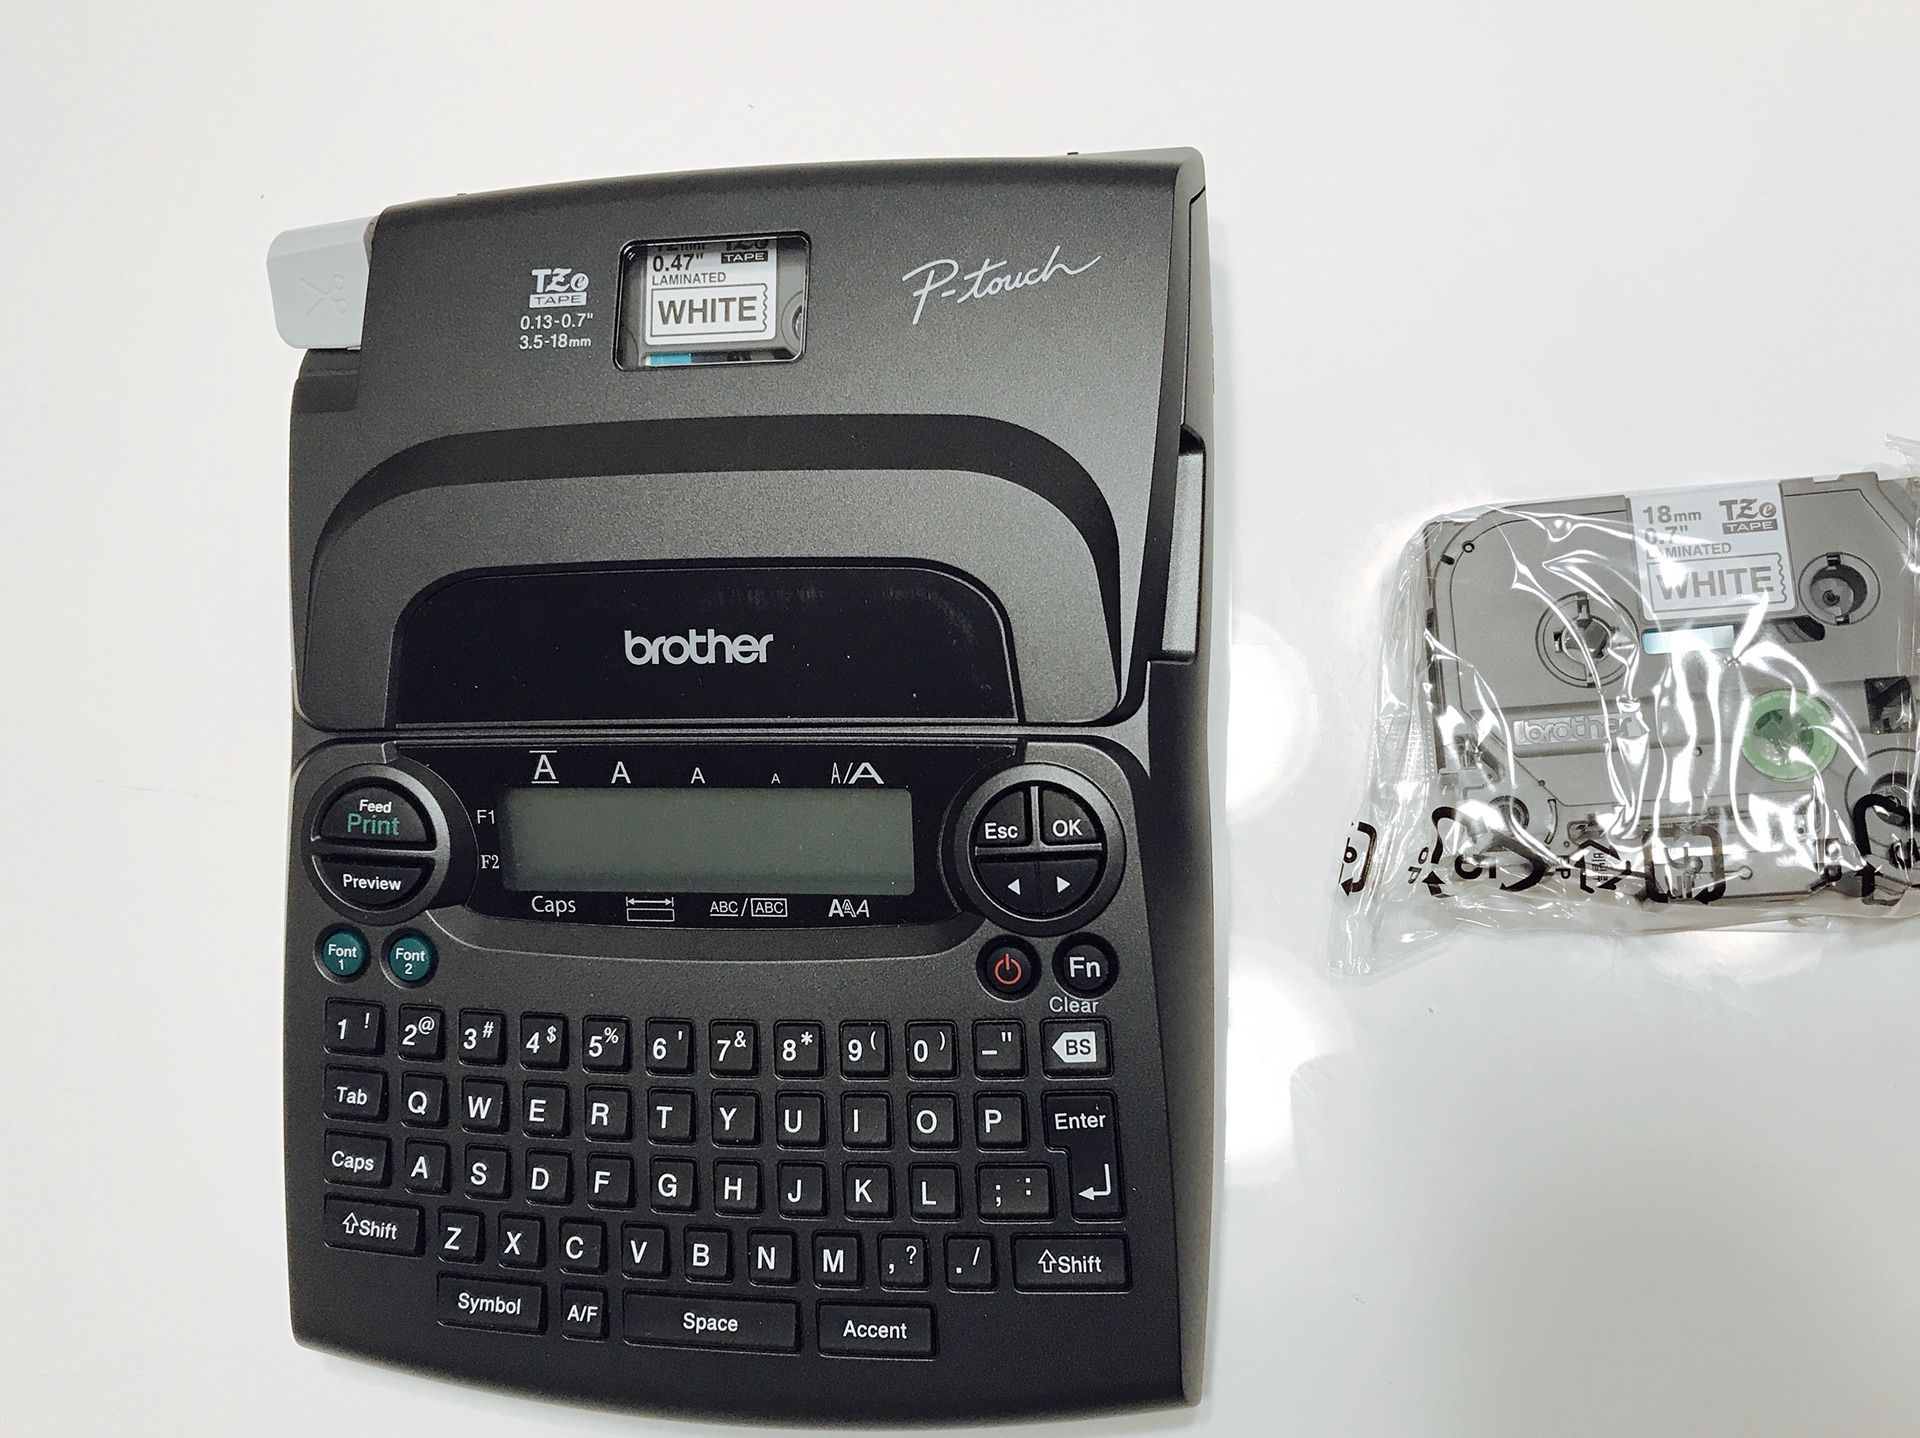 Brother P-Touch labeler with a tape